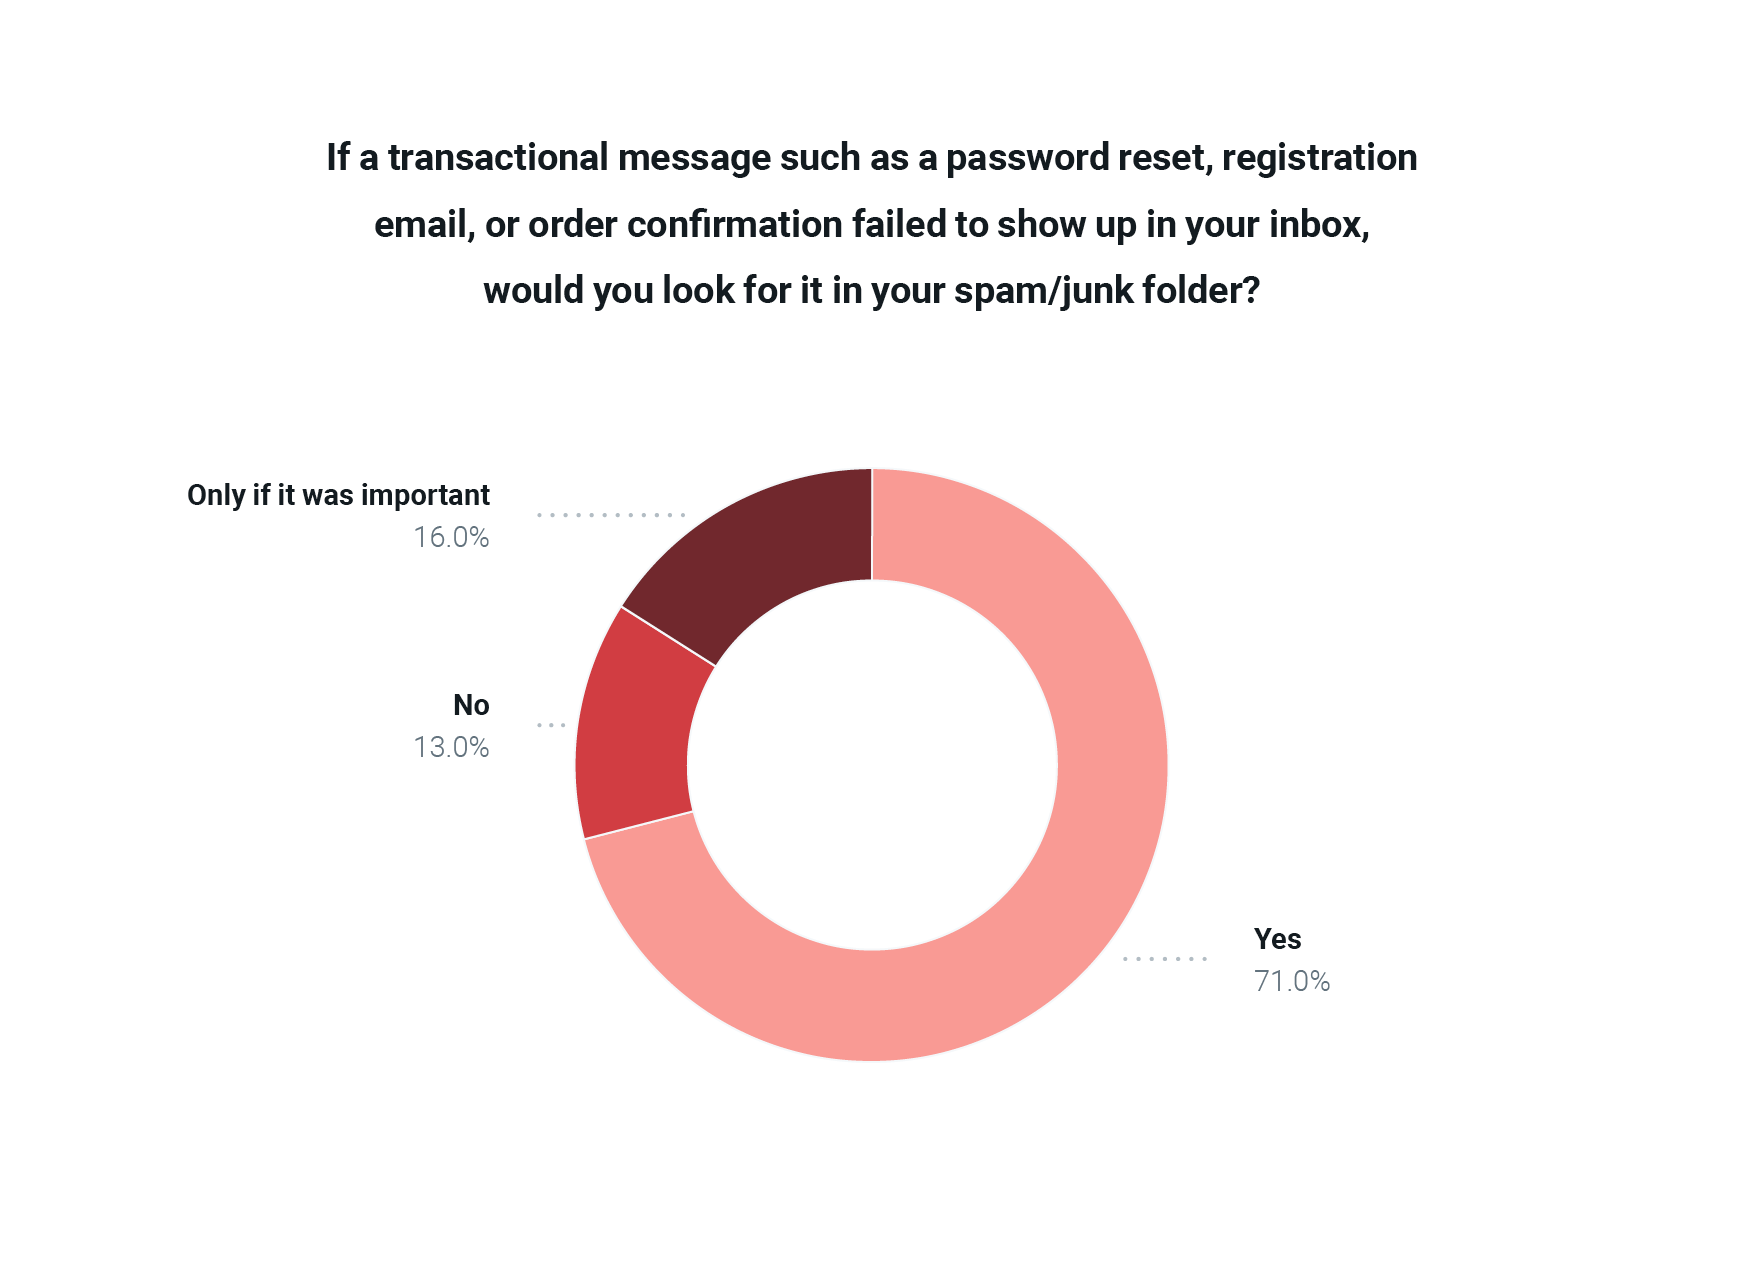 Graph showing 71% of consumers would check spam for missing transactional messages.